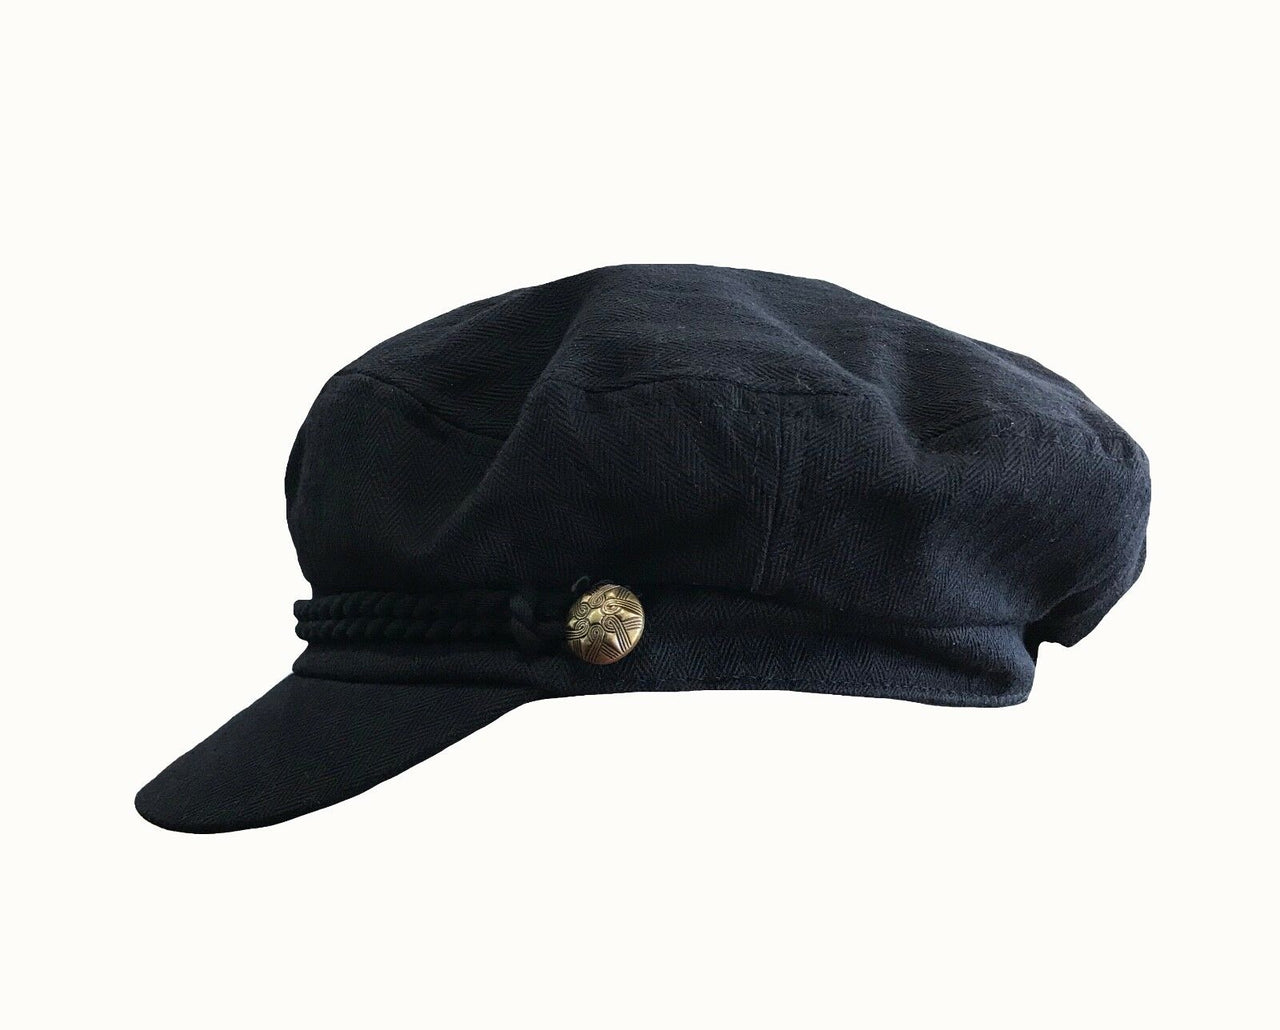 Outlet Camping Greek Fisherman's Cap - Black – Outlet Newtown